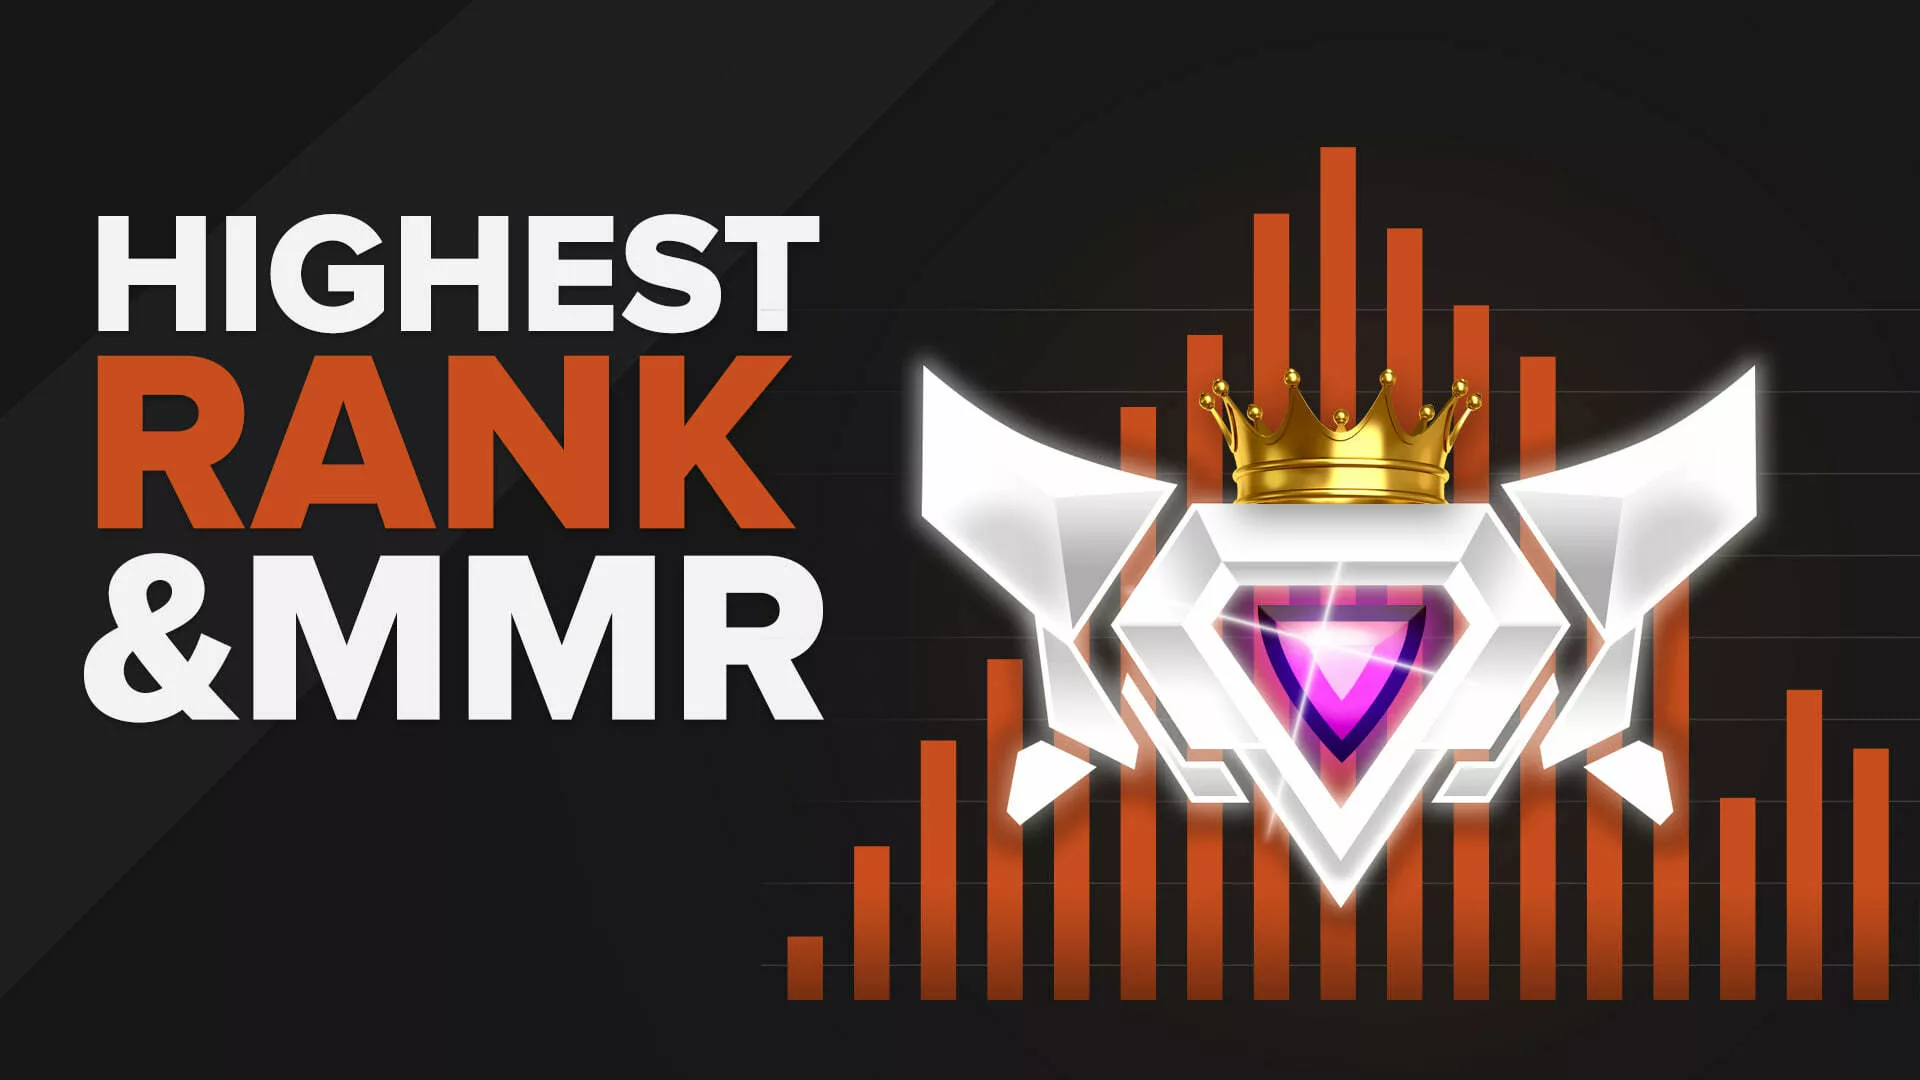 What is the Highest Rank & MMR in Rocket League?